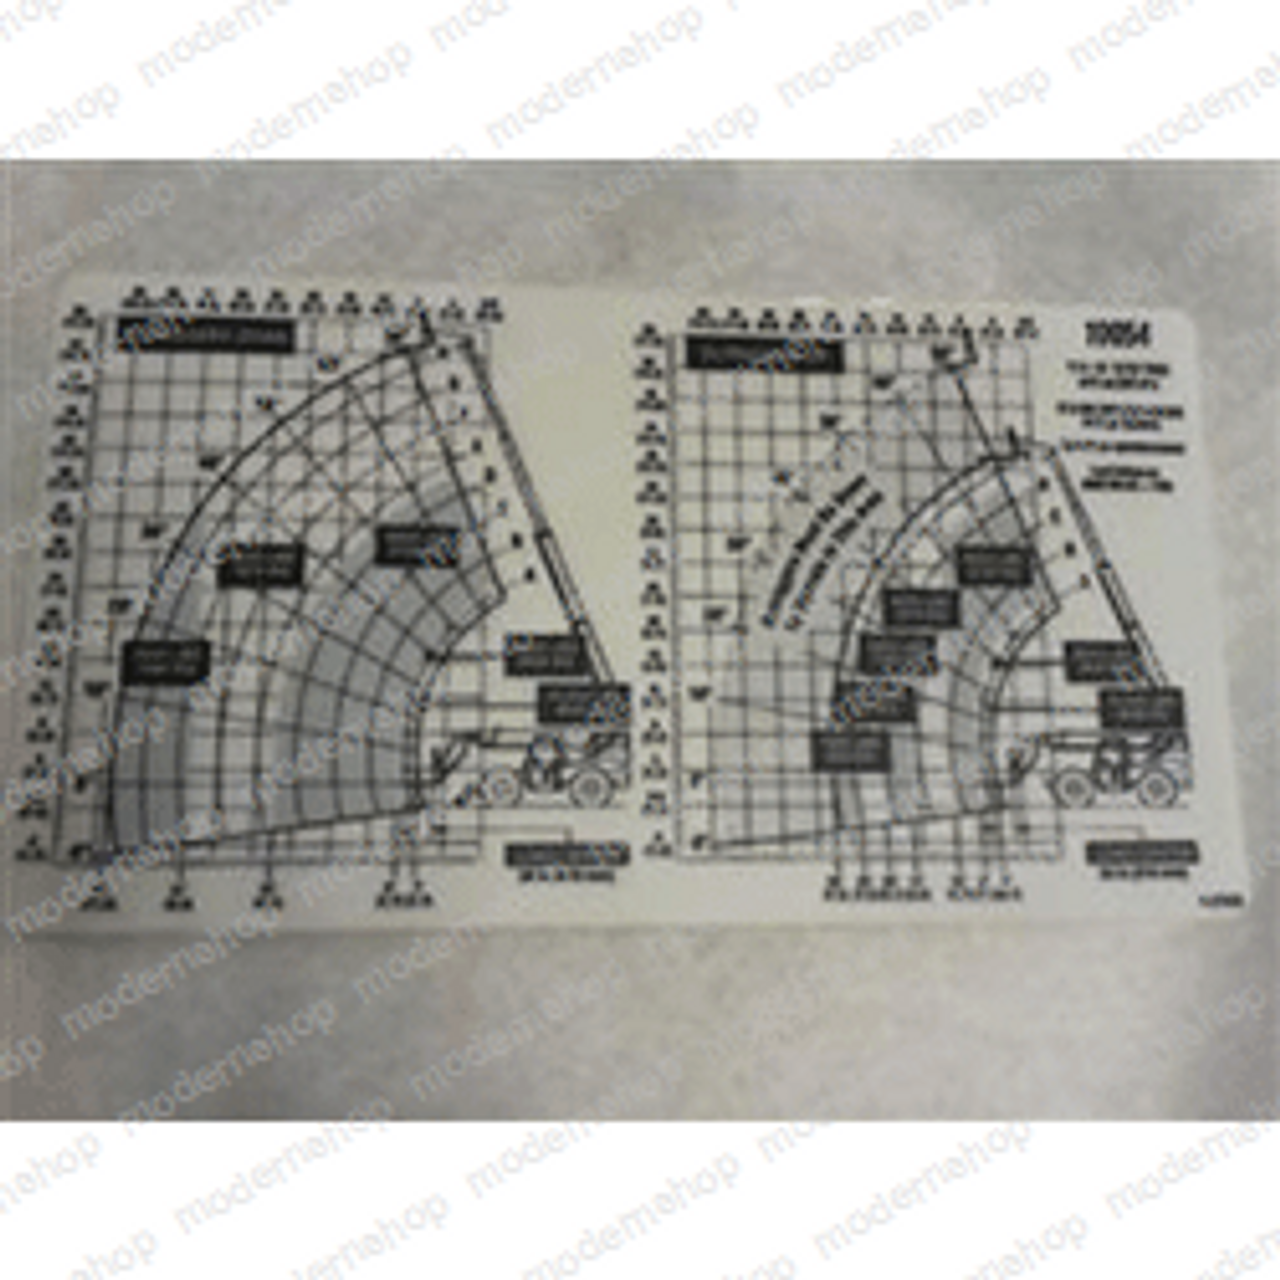 61220-001: Upright DECAL - ANSI REQUIREMENTS 1990